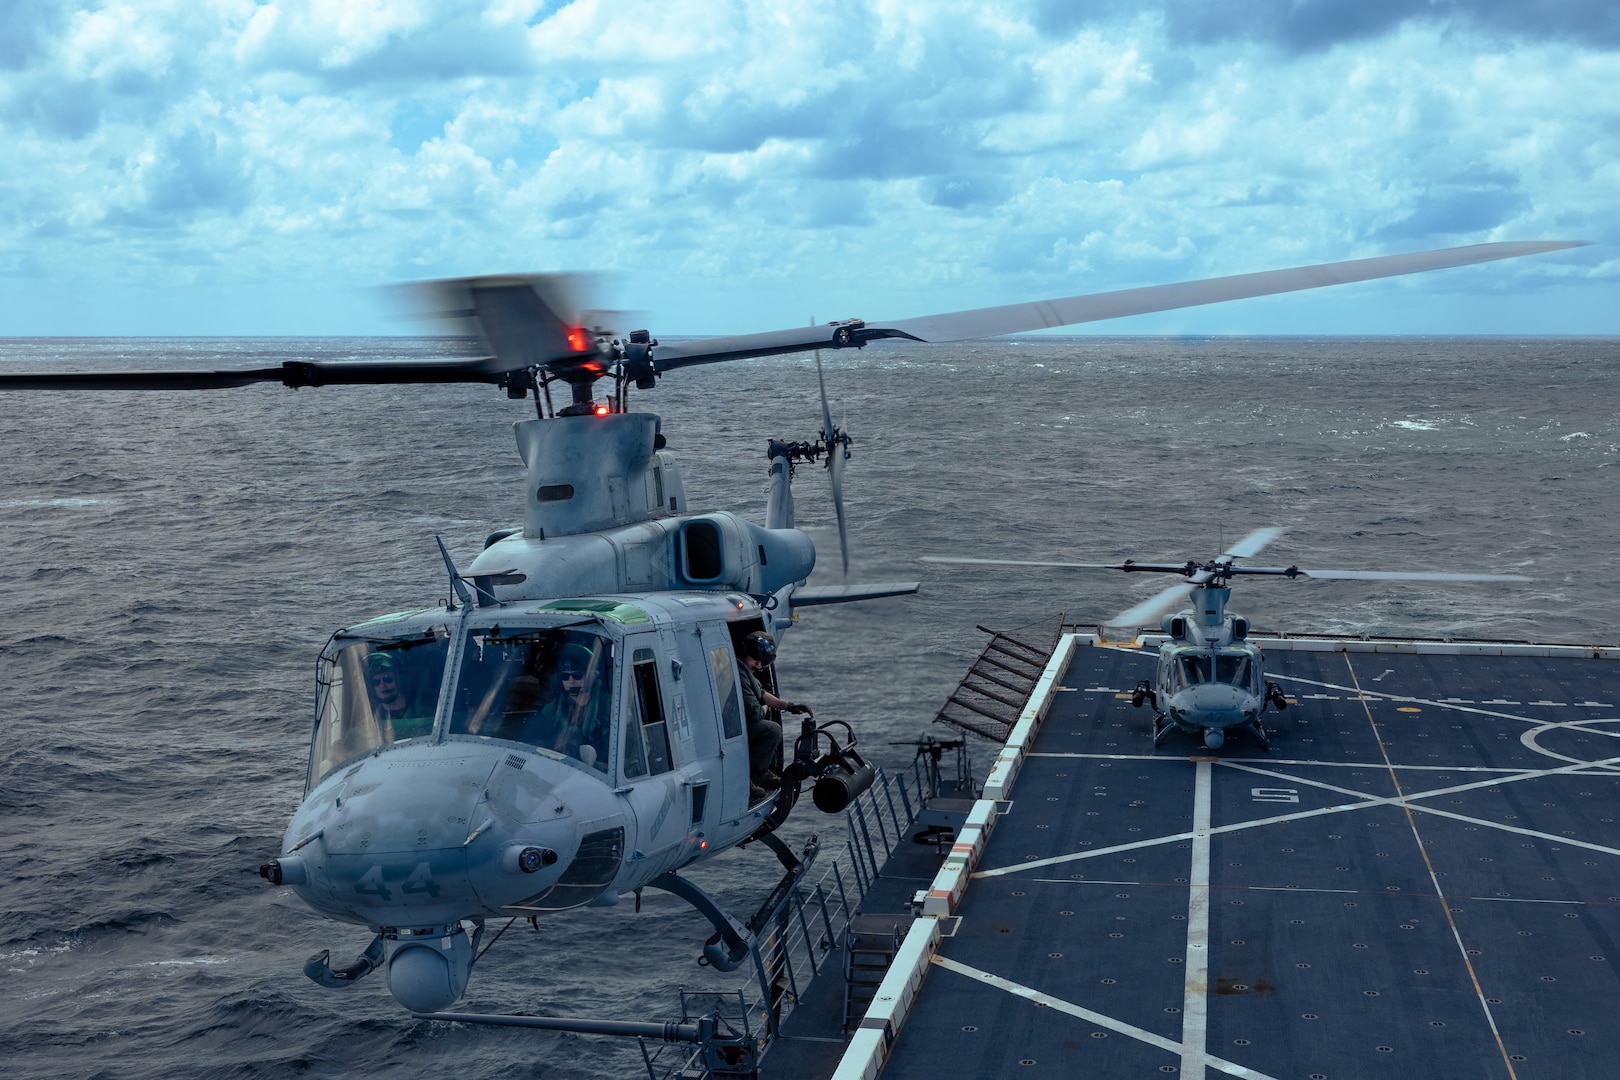 A U.S. Marine Corps UH-1Y Venom helicopter assigned to Light Attack Helicopter Squadron (HMLA) 773 hovers above the landing pad of the San Antonio class dock landing ship USS Mesa Verde (LPD 19) in the North Atlantic Ocean, Aug. 16, 2022.